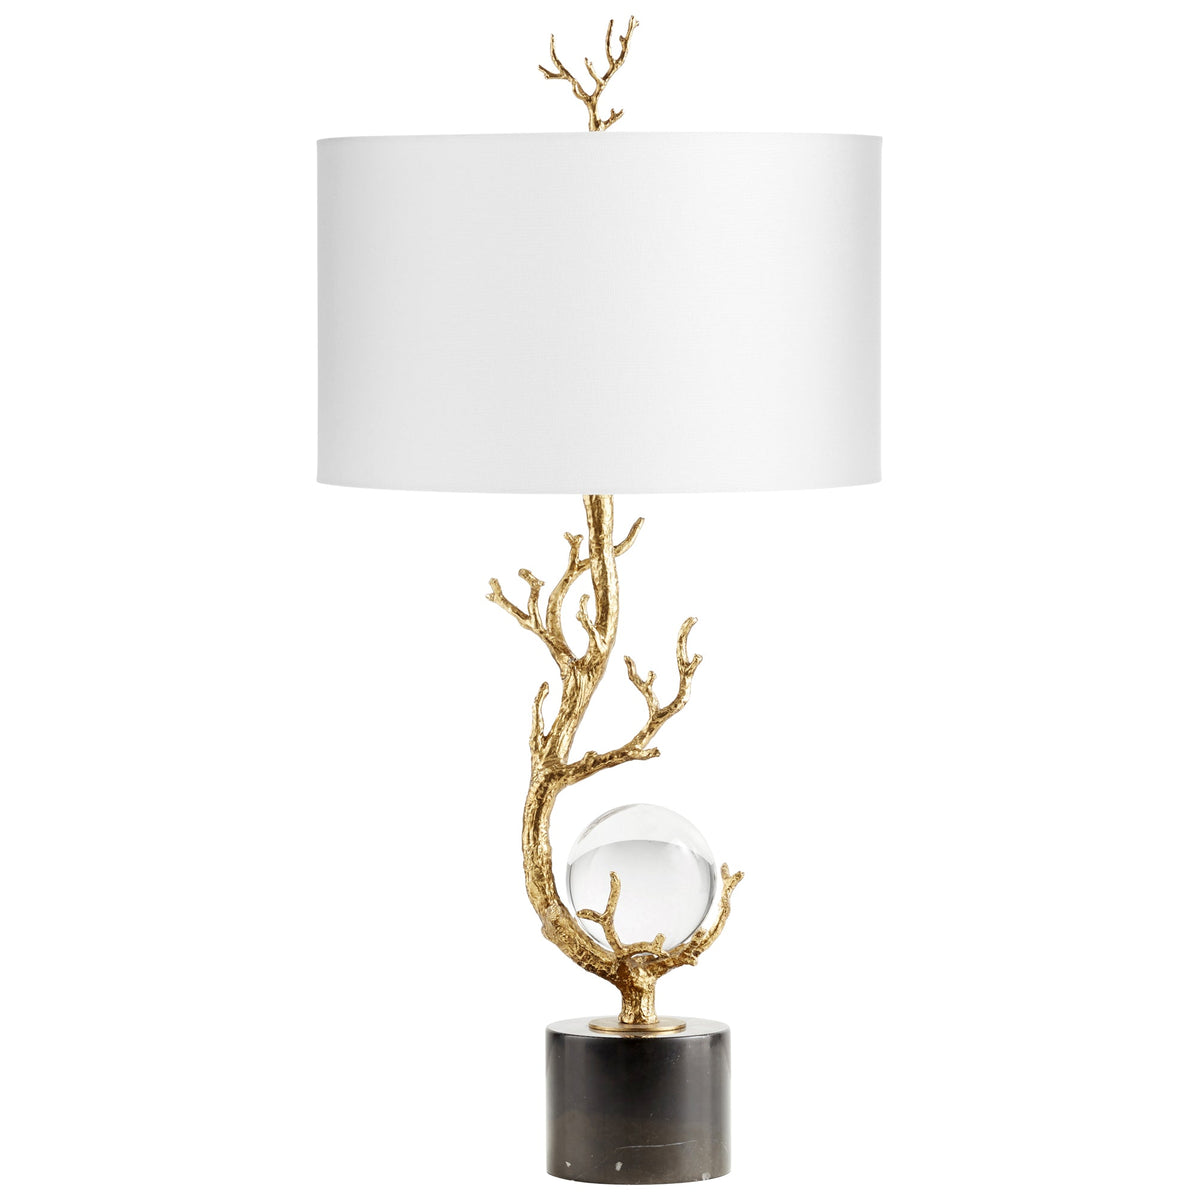 Autumnus Table Lamp by Cyan